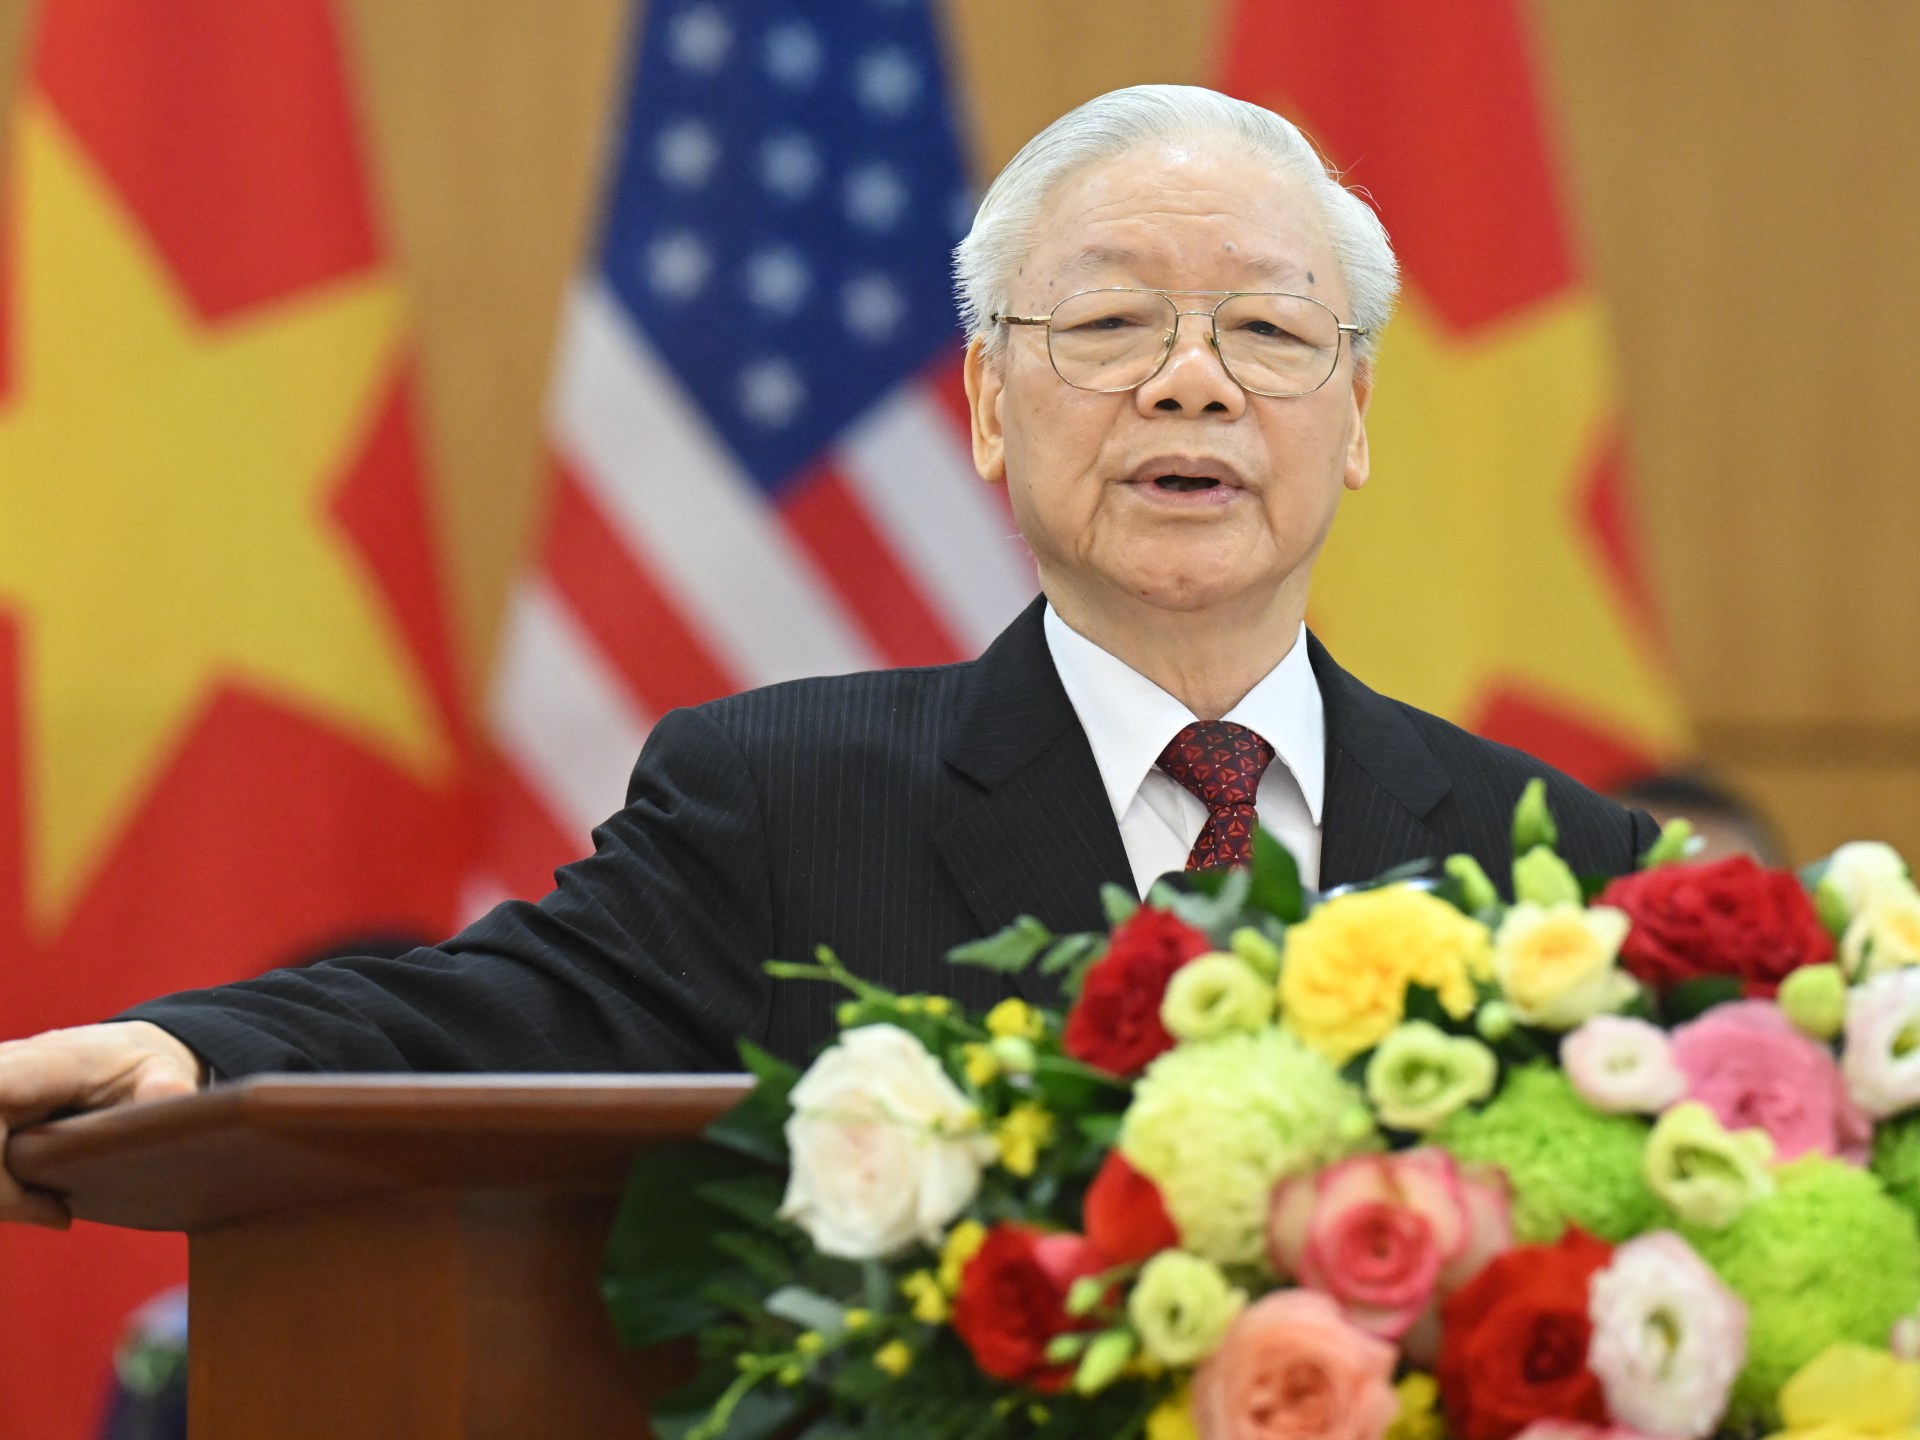 Vietnams Communist Party chief Nguyen Phu Trong dies at 80: State media | News [Video]